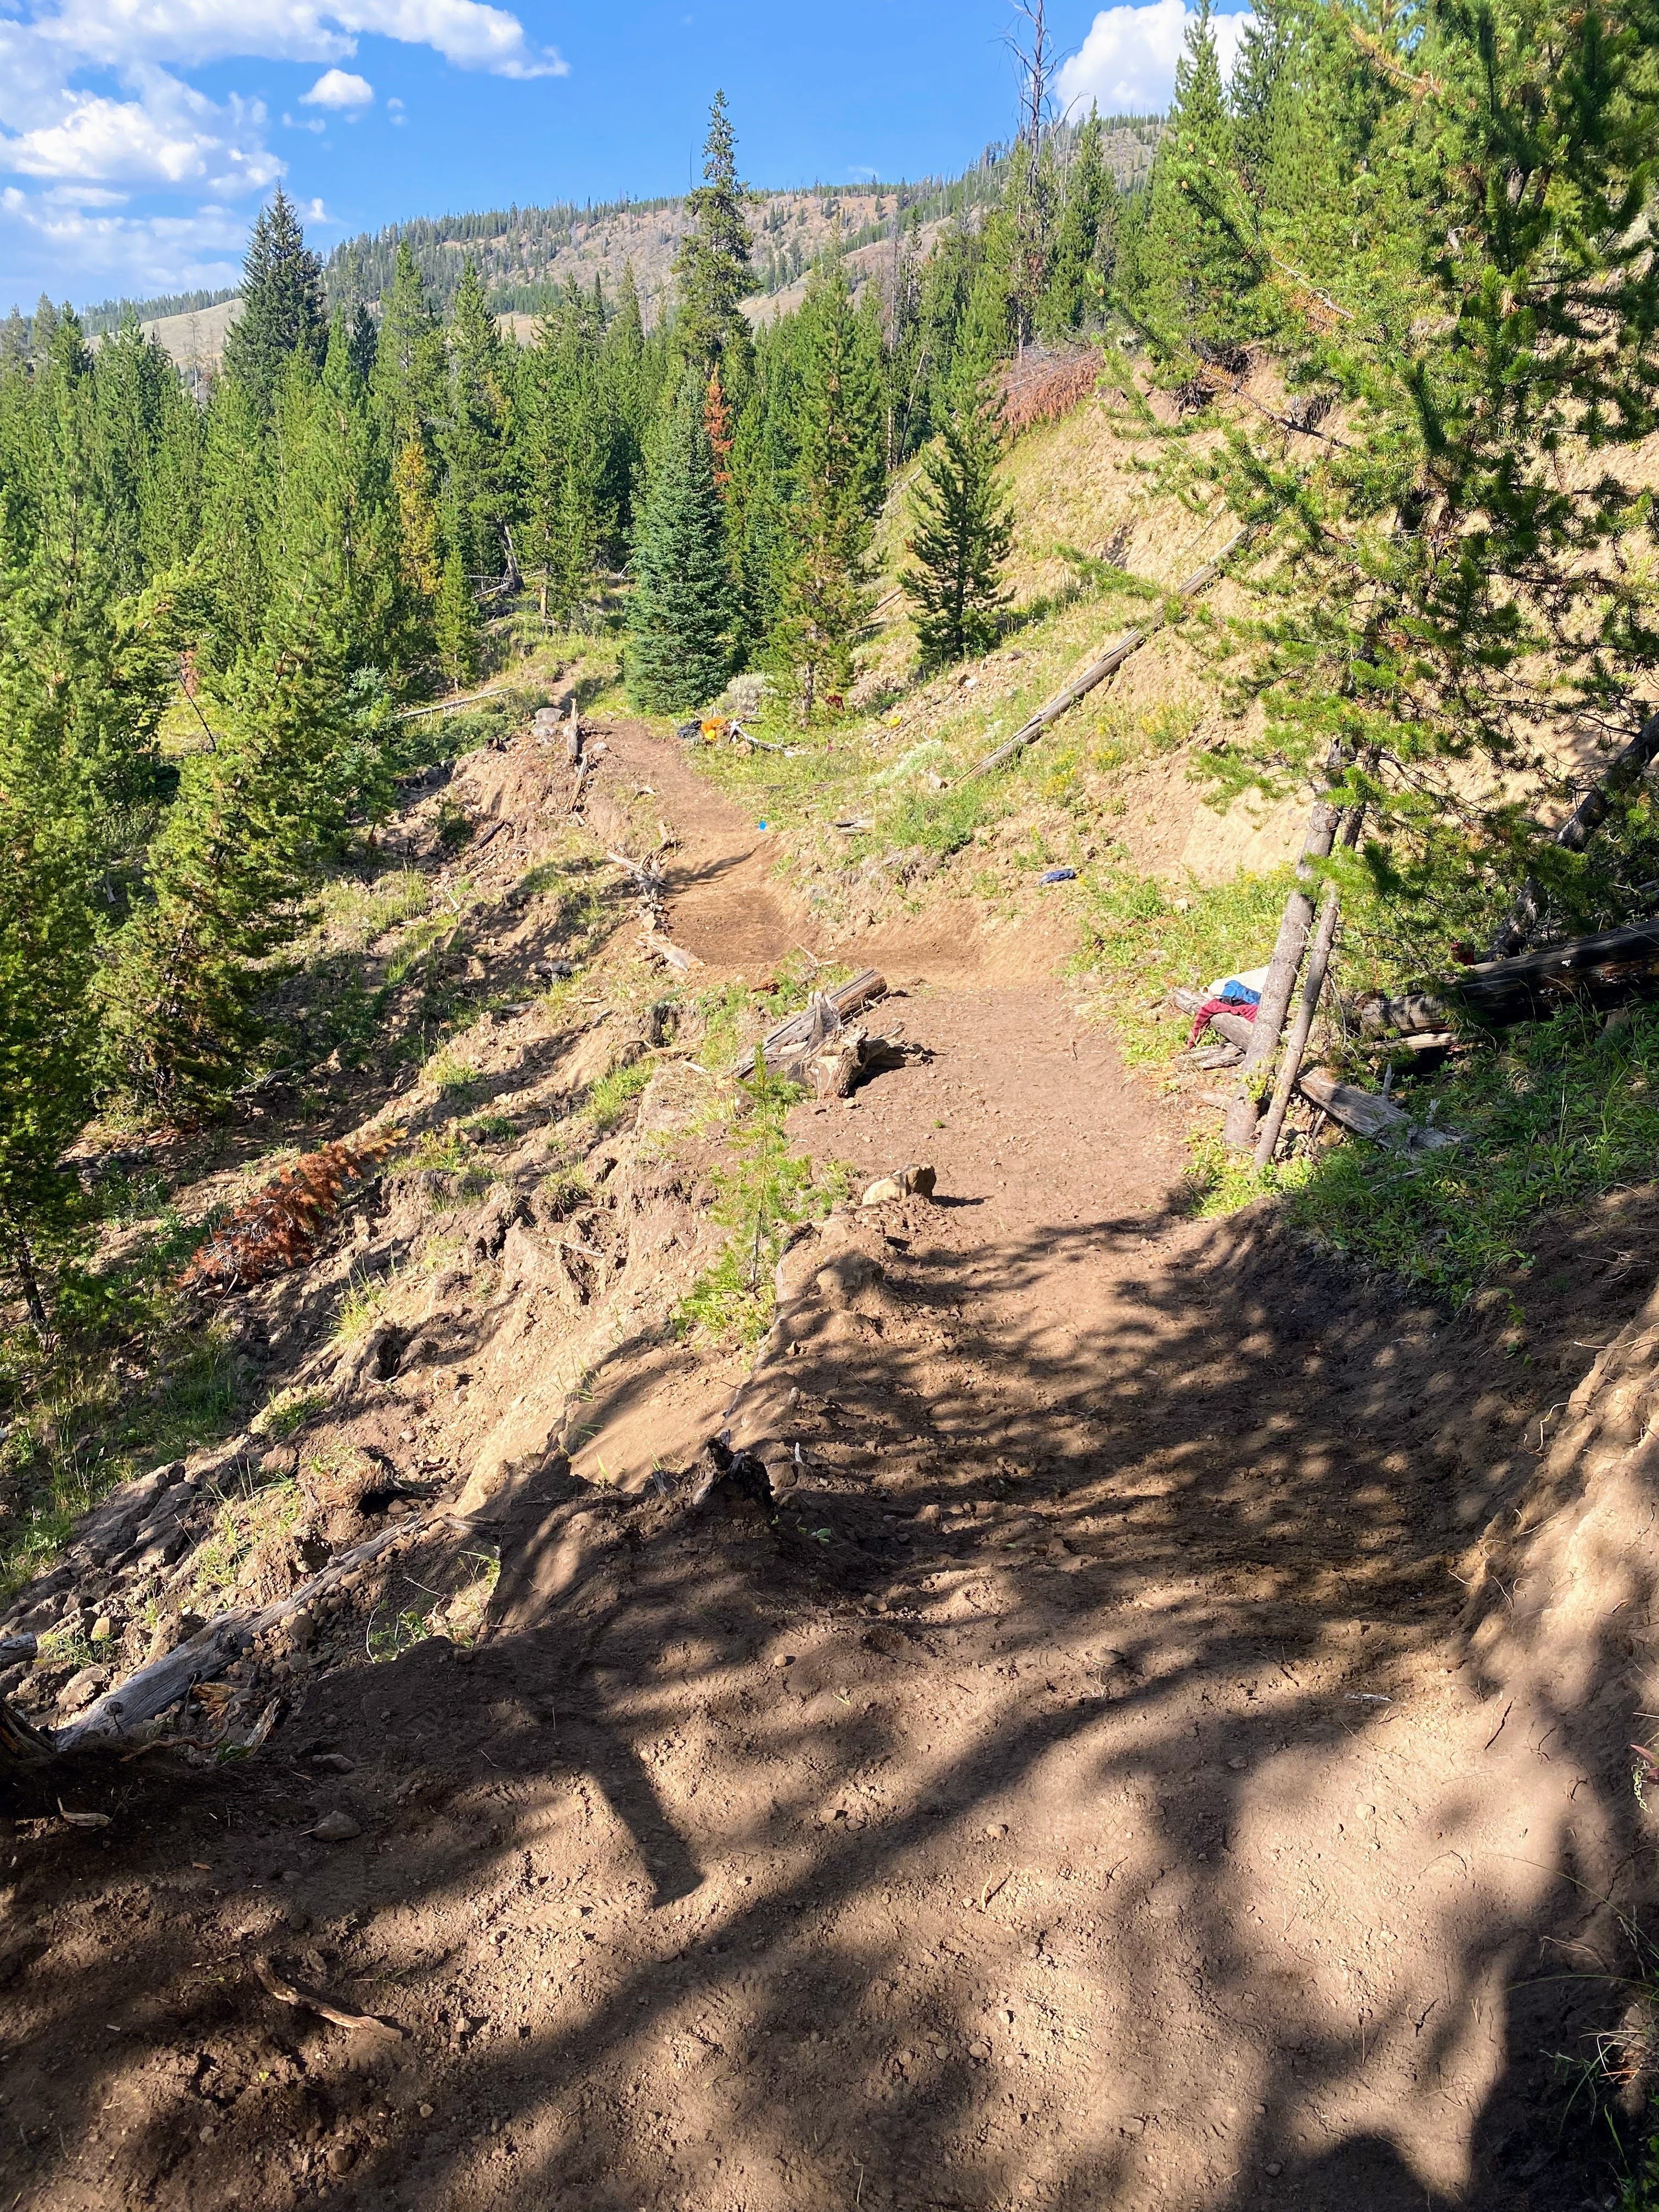 A view down a recently repaired trail in Yellowstone.